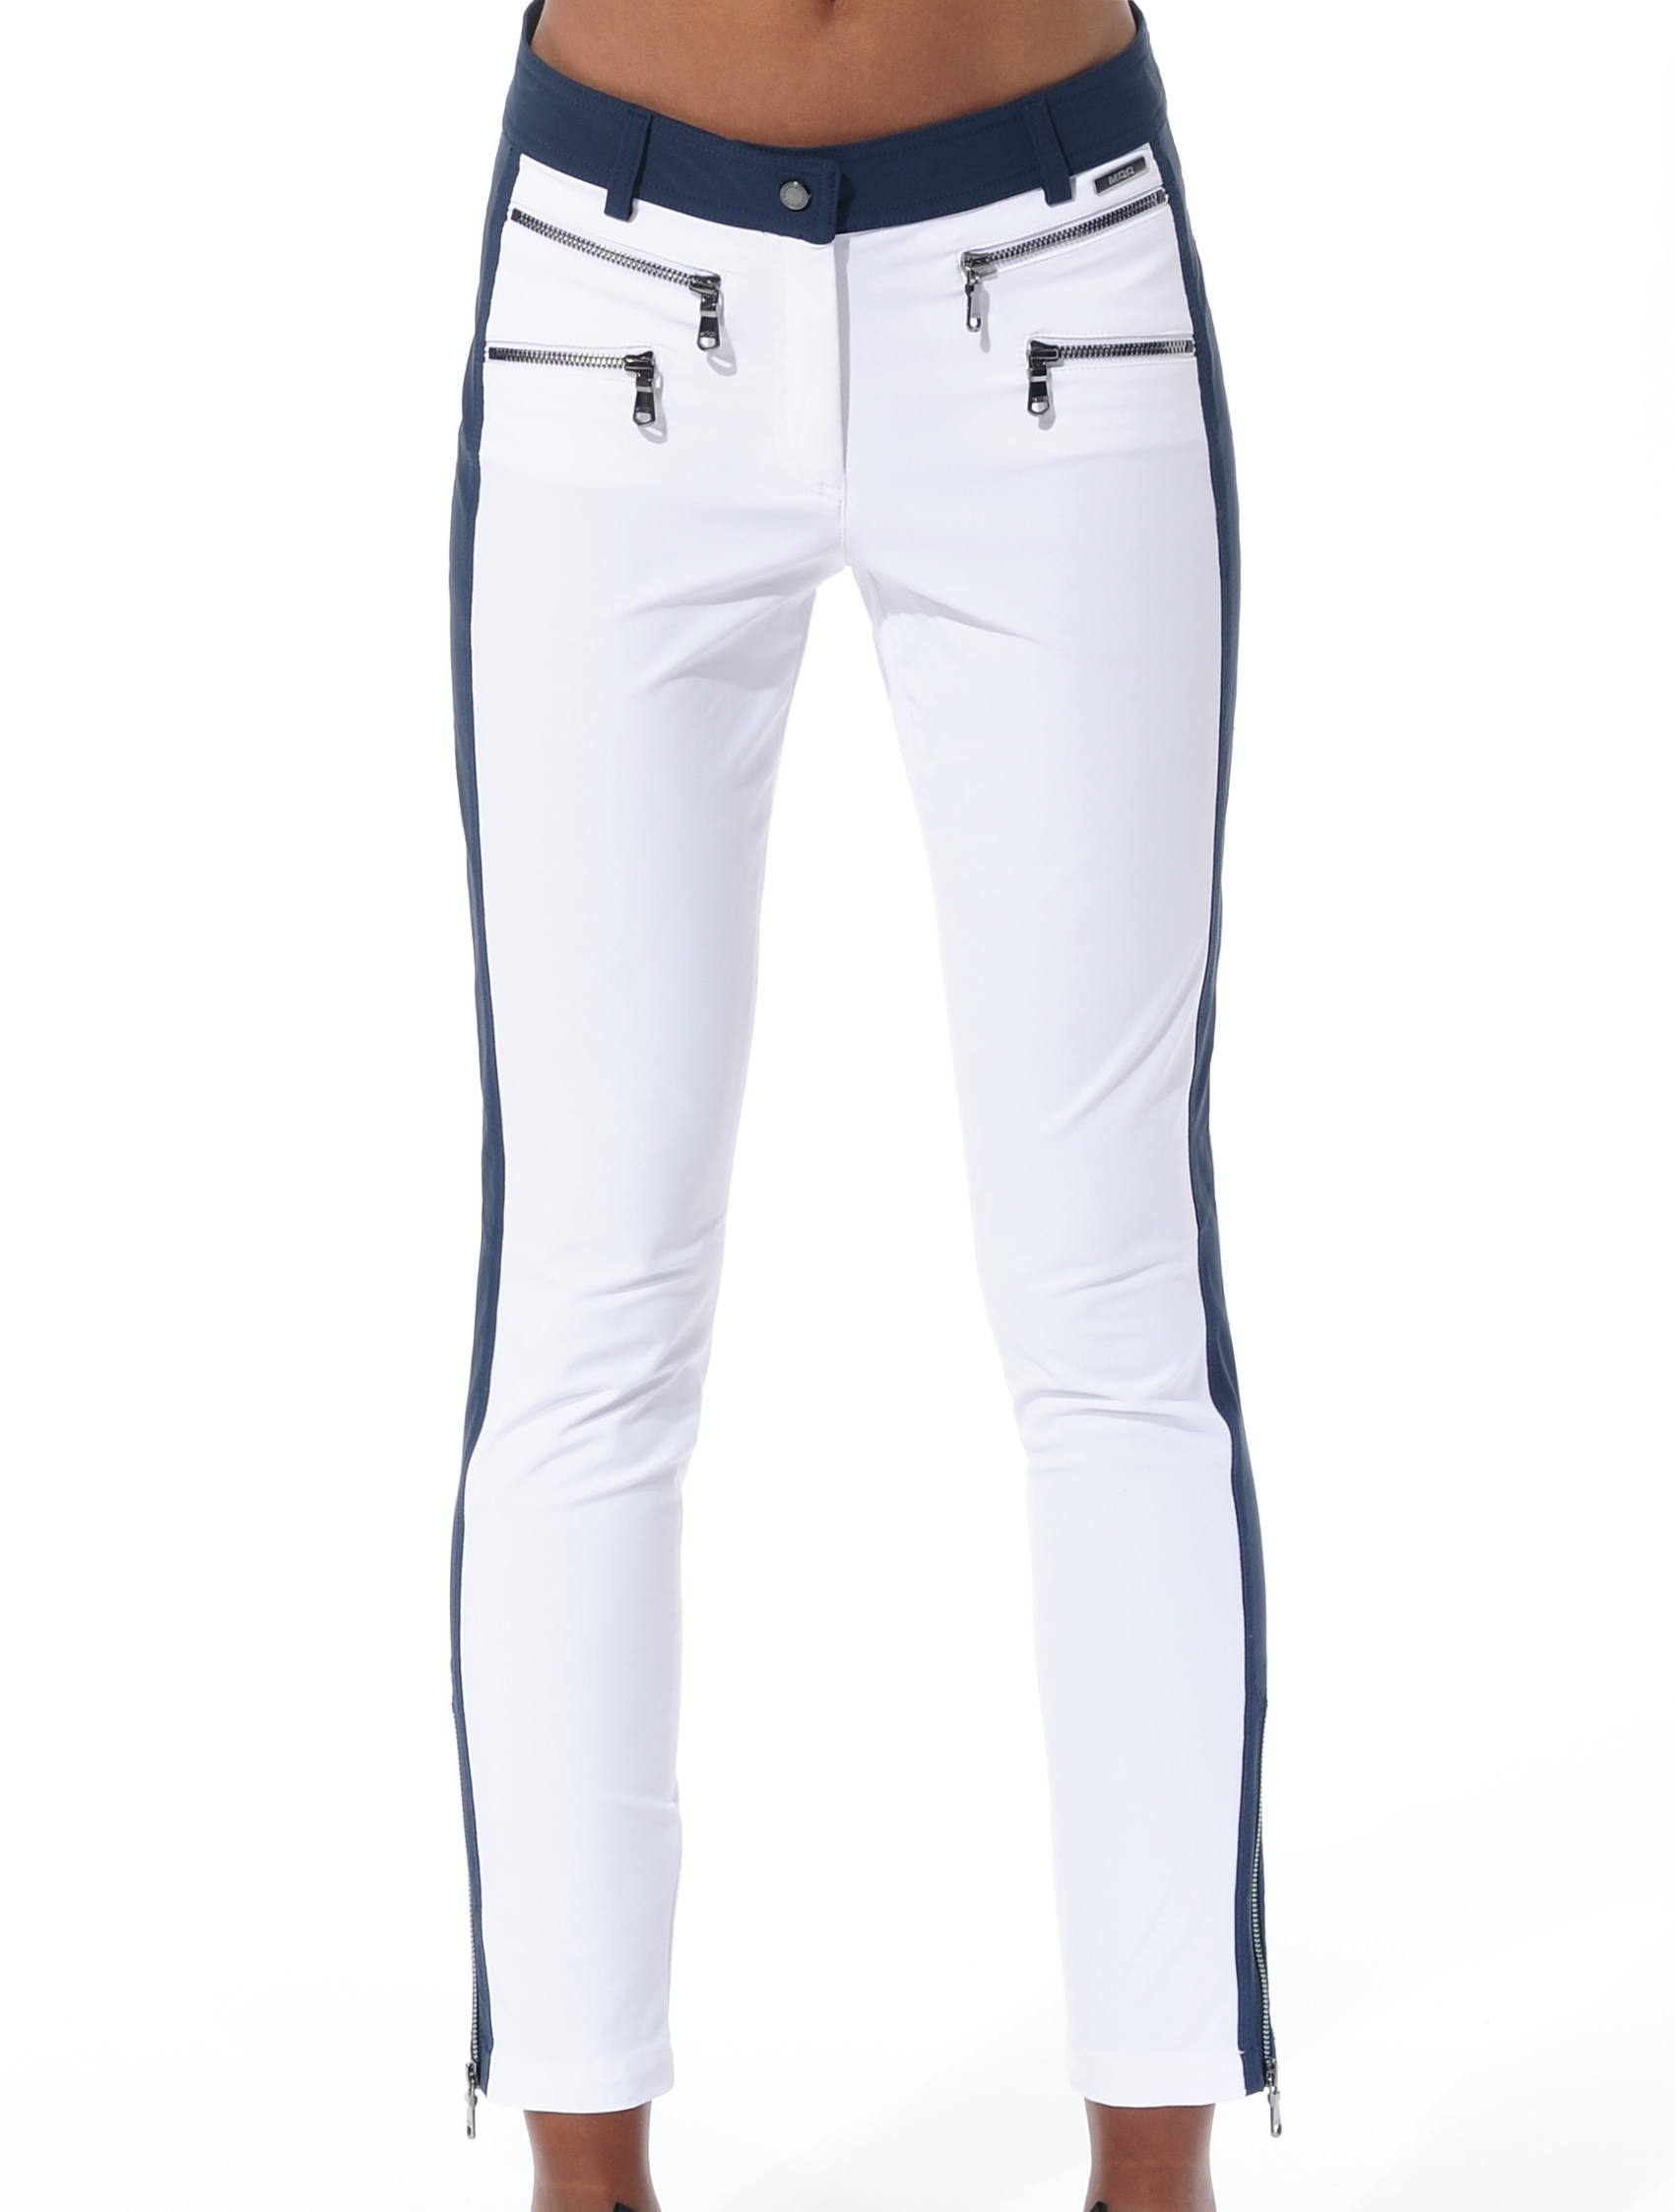 shiny stretch double zip ankle pants white/silver 